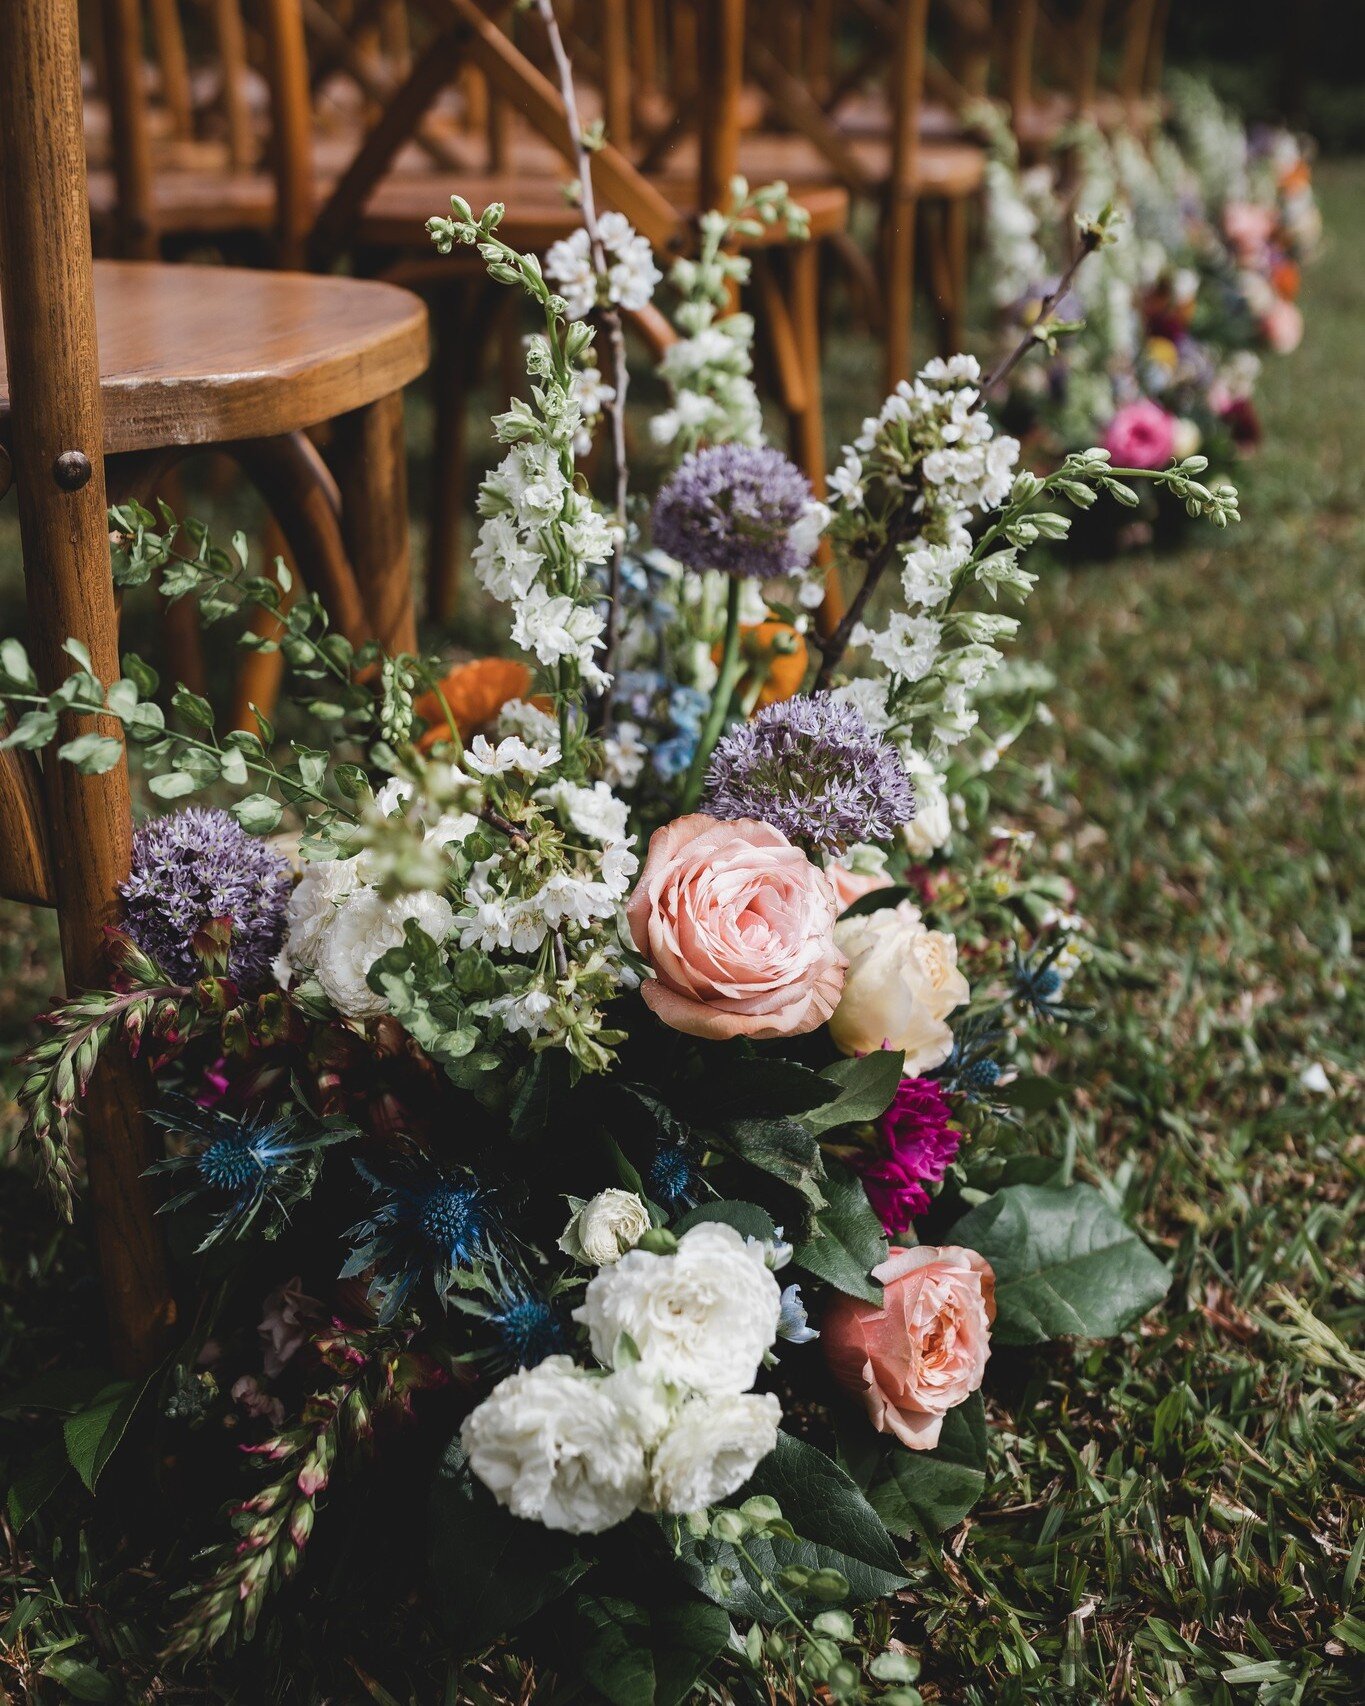 All I needed to hear was &quot;they want it to be colorful&quot; to envision the glorious, rainbow flower filled wedding this was going to be.  When you're given free reign and every color to choose from, magic happens ✨✨✨

Photographer: @taralee.pho